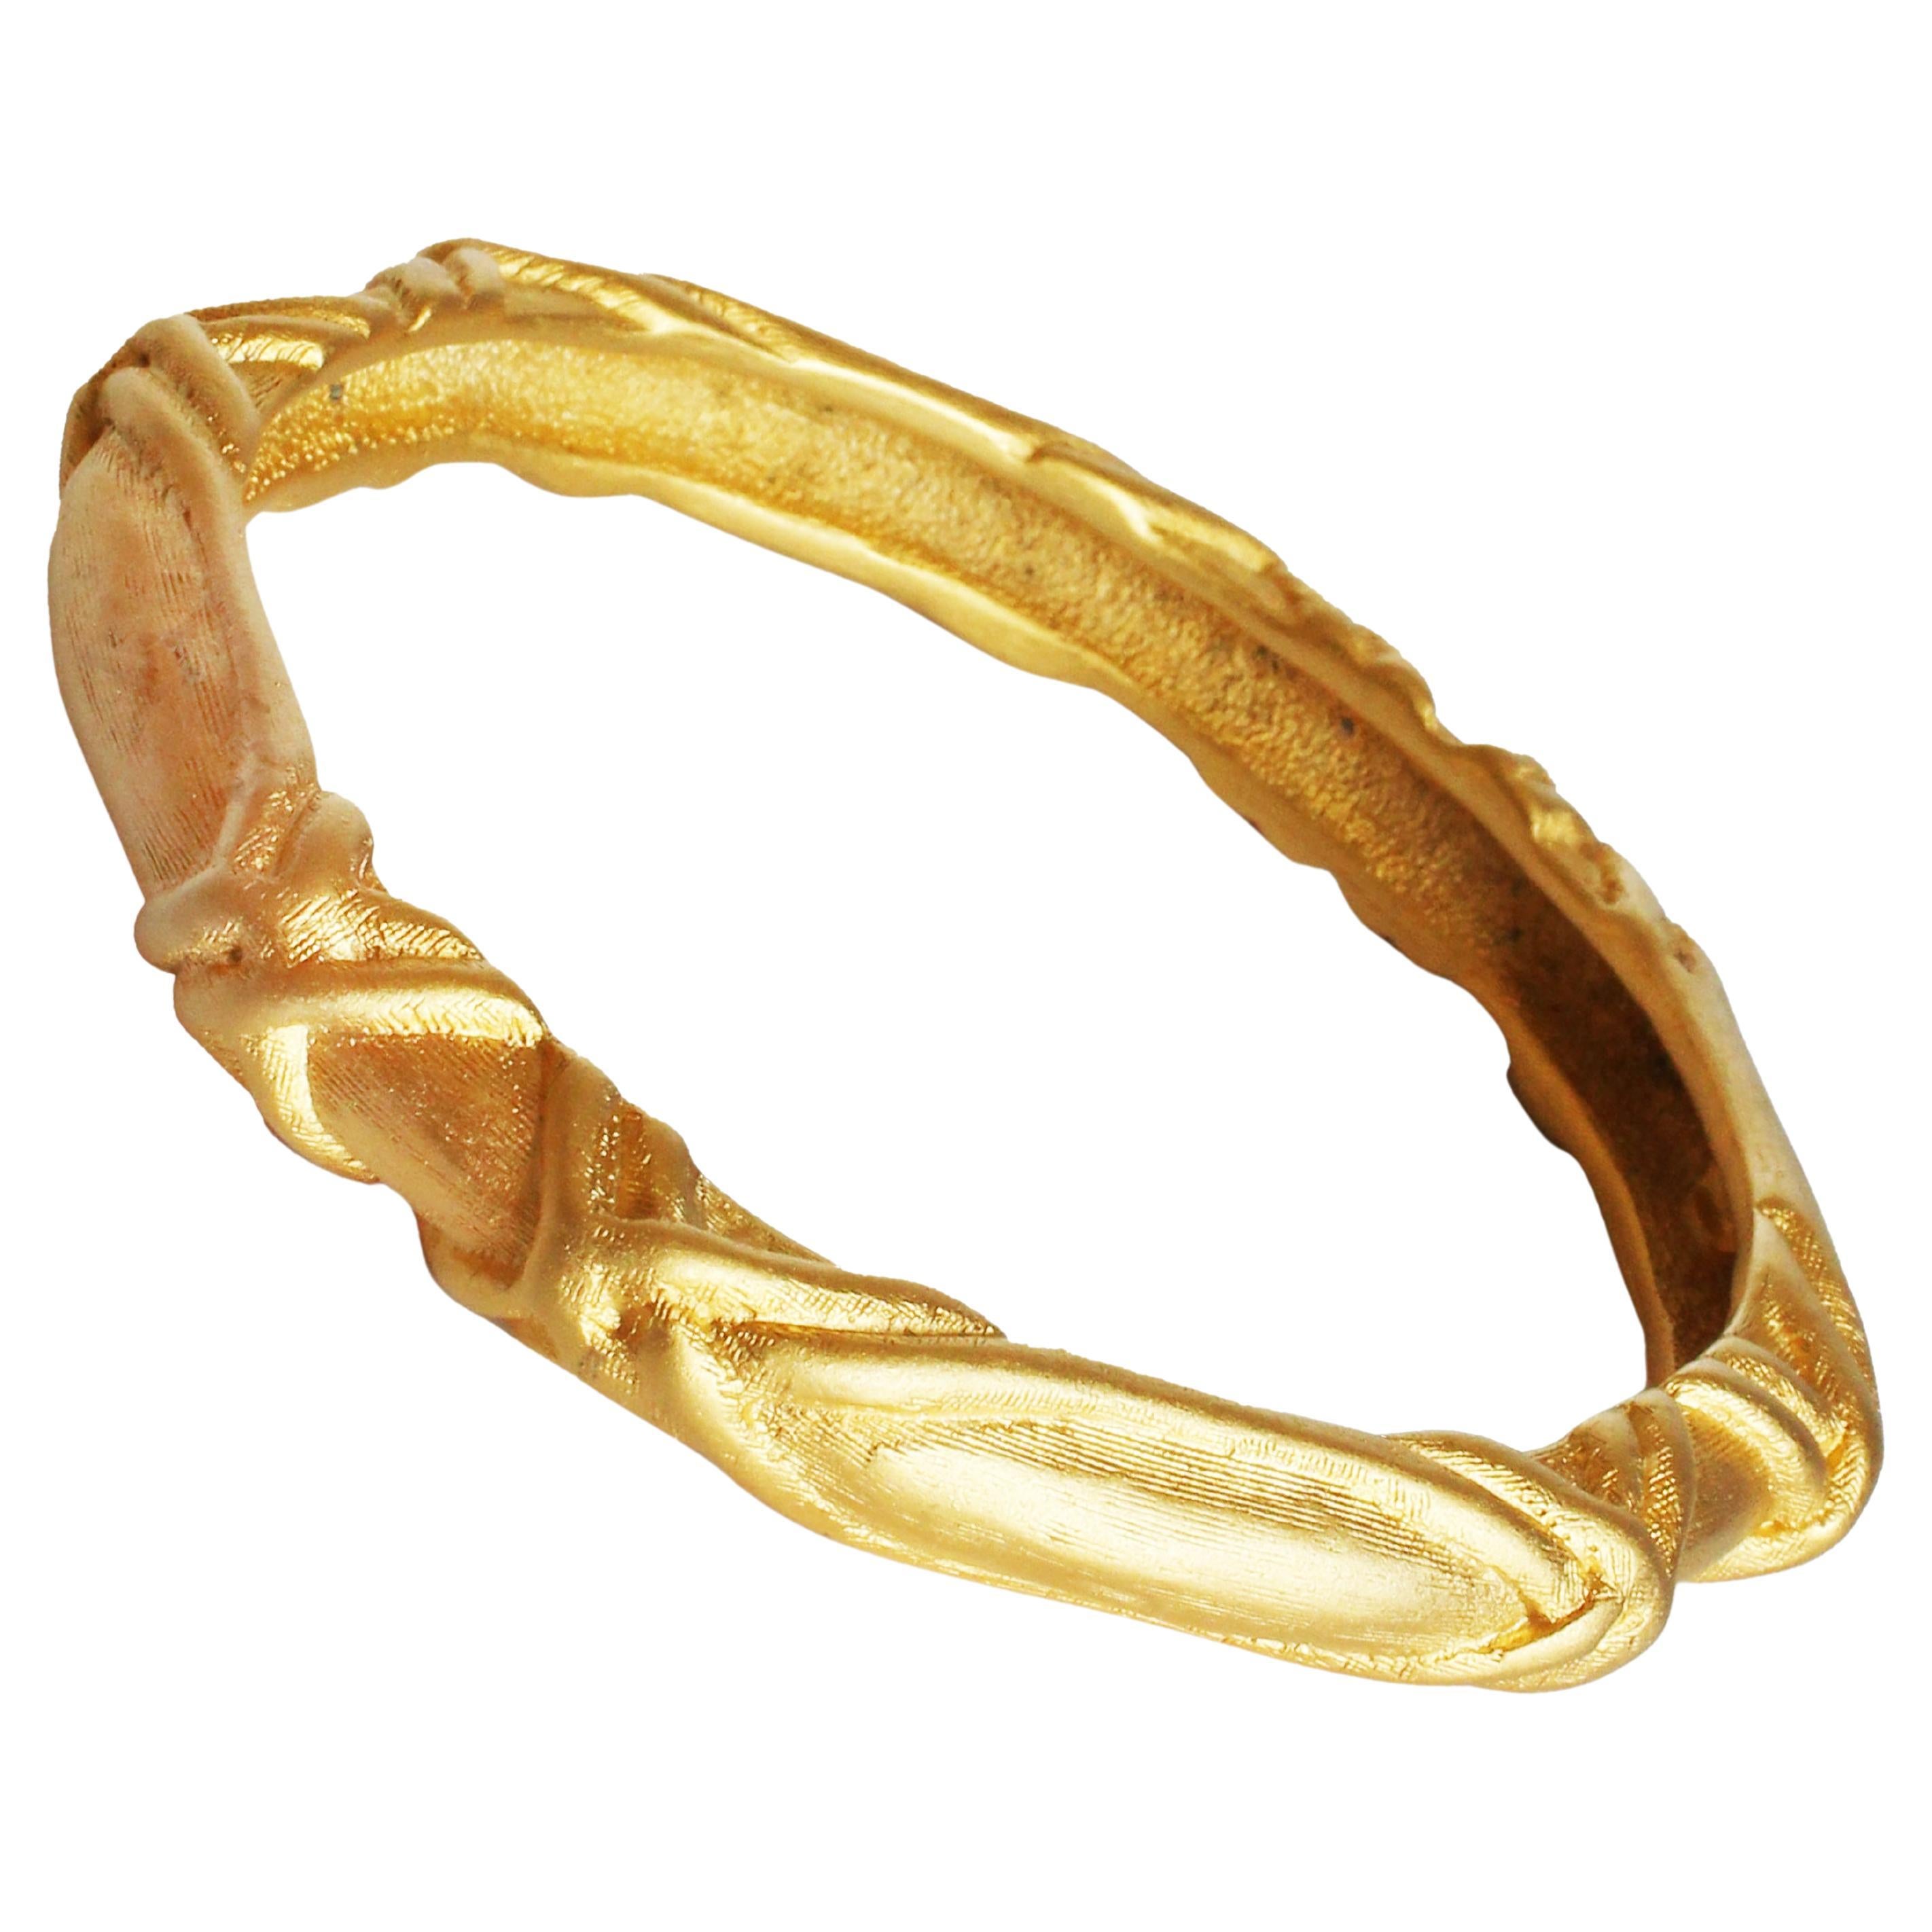 Givenchy Bracelet Bangle Gold Metal Textured Abstract Vintage 80s Jewelry  For Sale